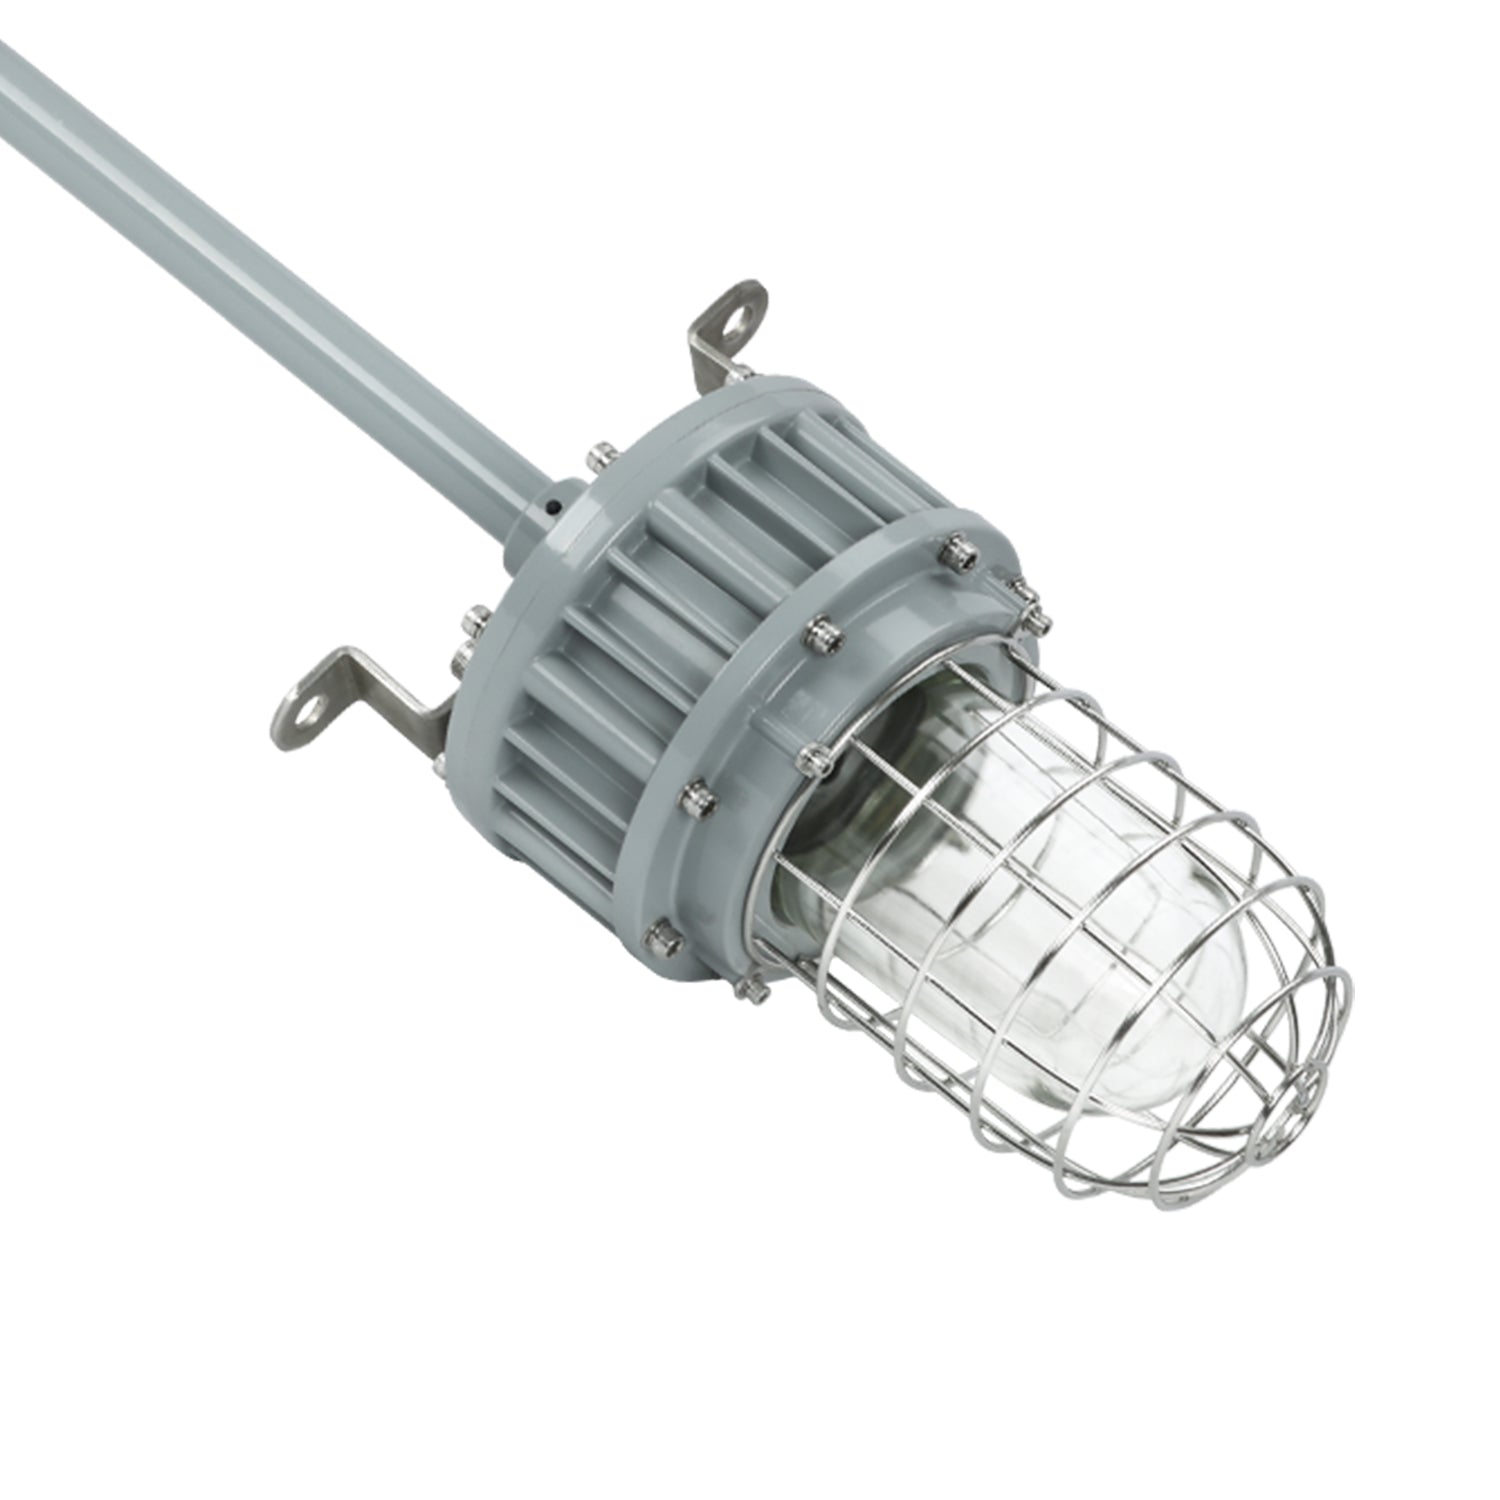 LED Explosion Proof Jelly Jar Light 40W - 5000K Non-Dimmable Durable and Efficient Lighting Solution for Hazardous Locations with 5400LM and IP66 Protection, Ideal for Industrial Environments